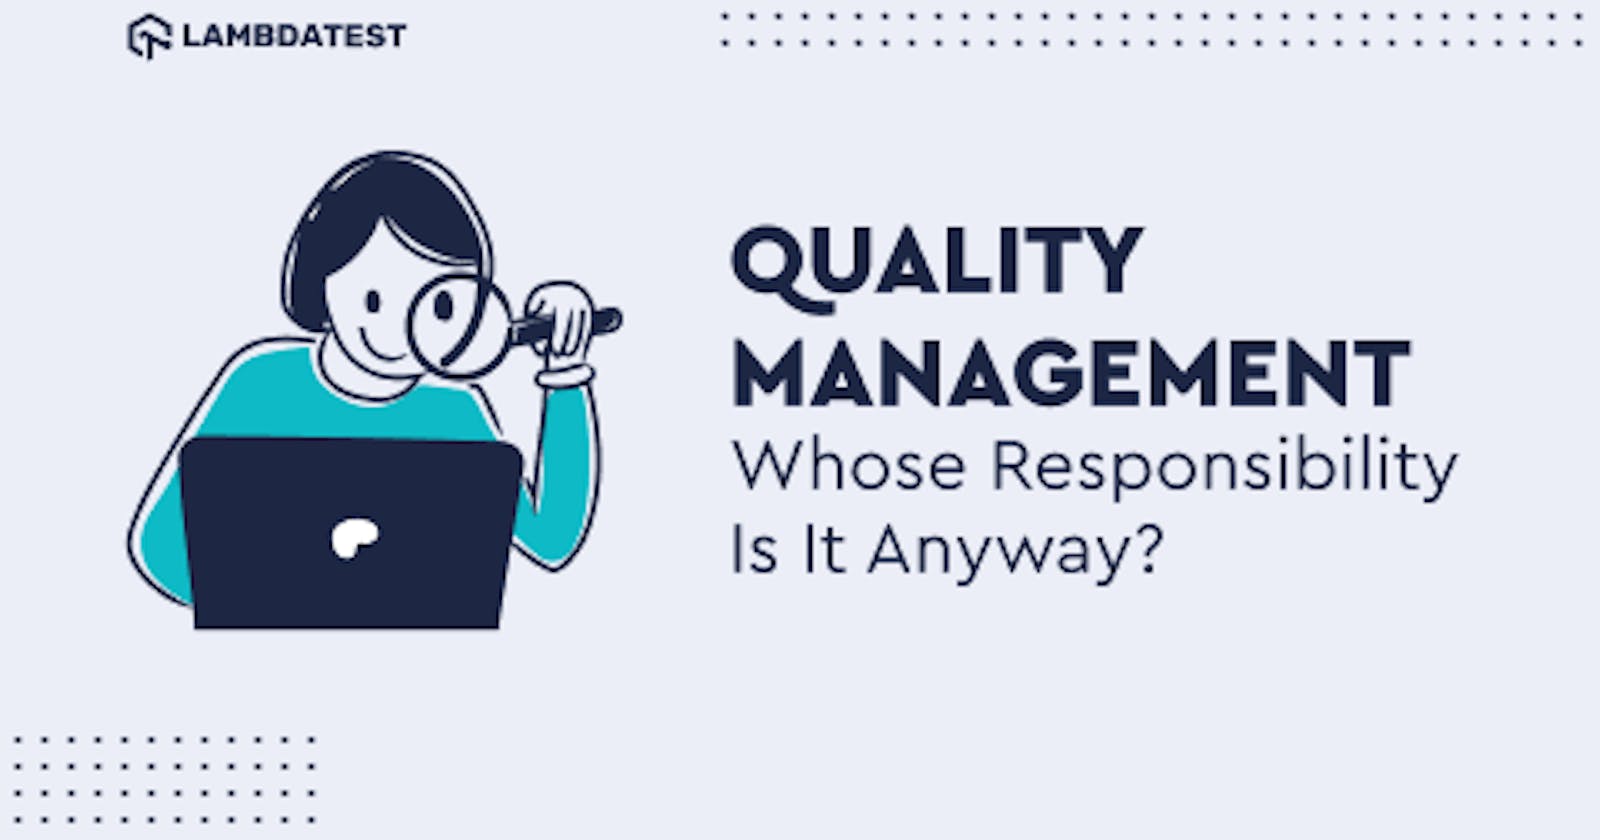 Quality Management – Whose Responsibility is it Anyway?